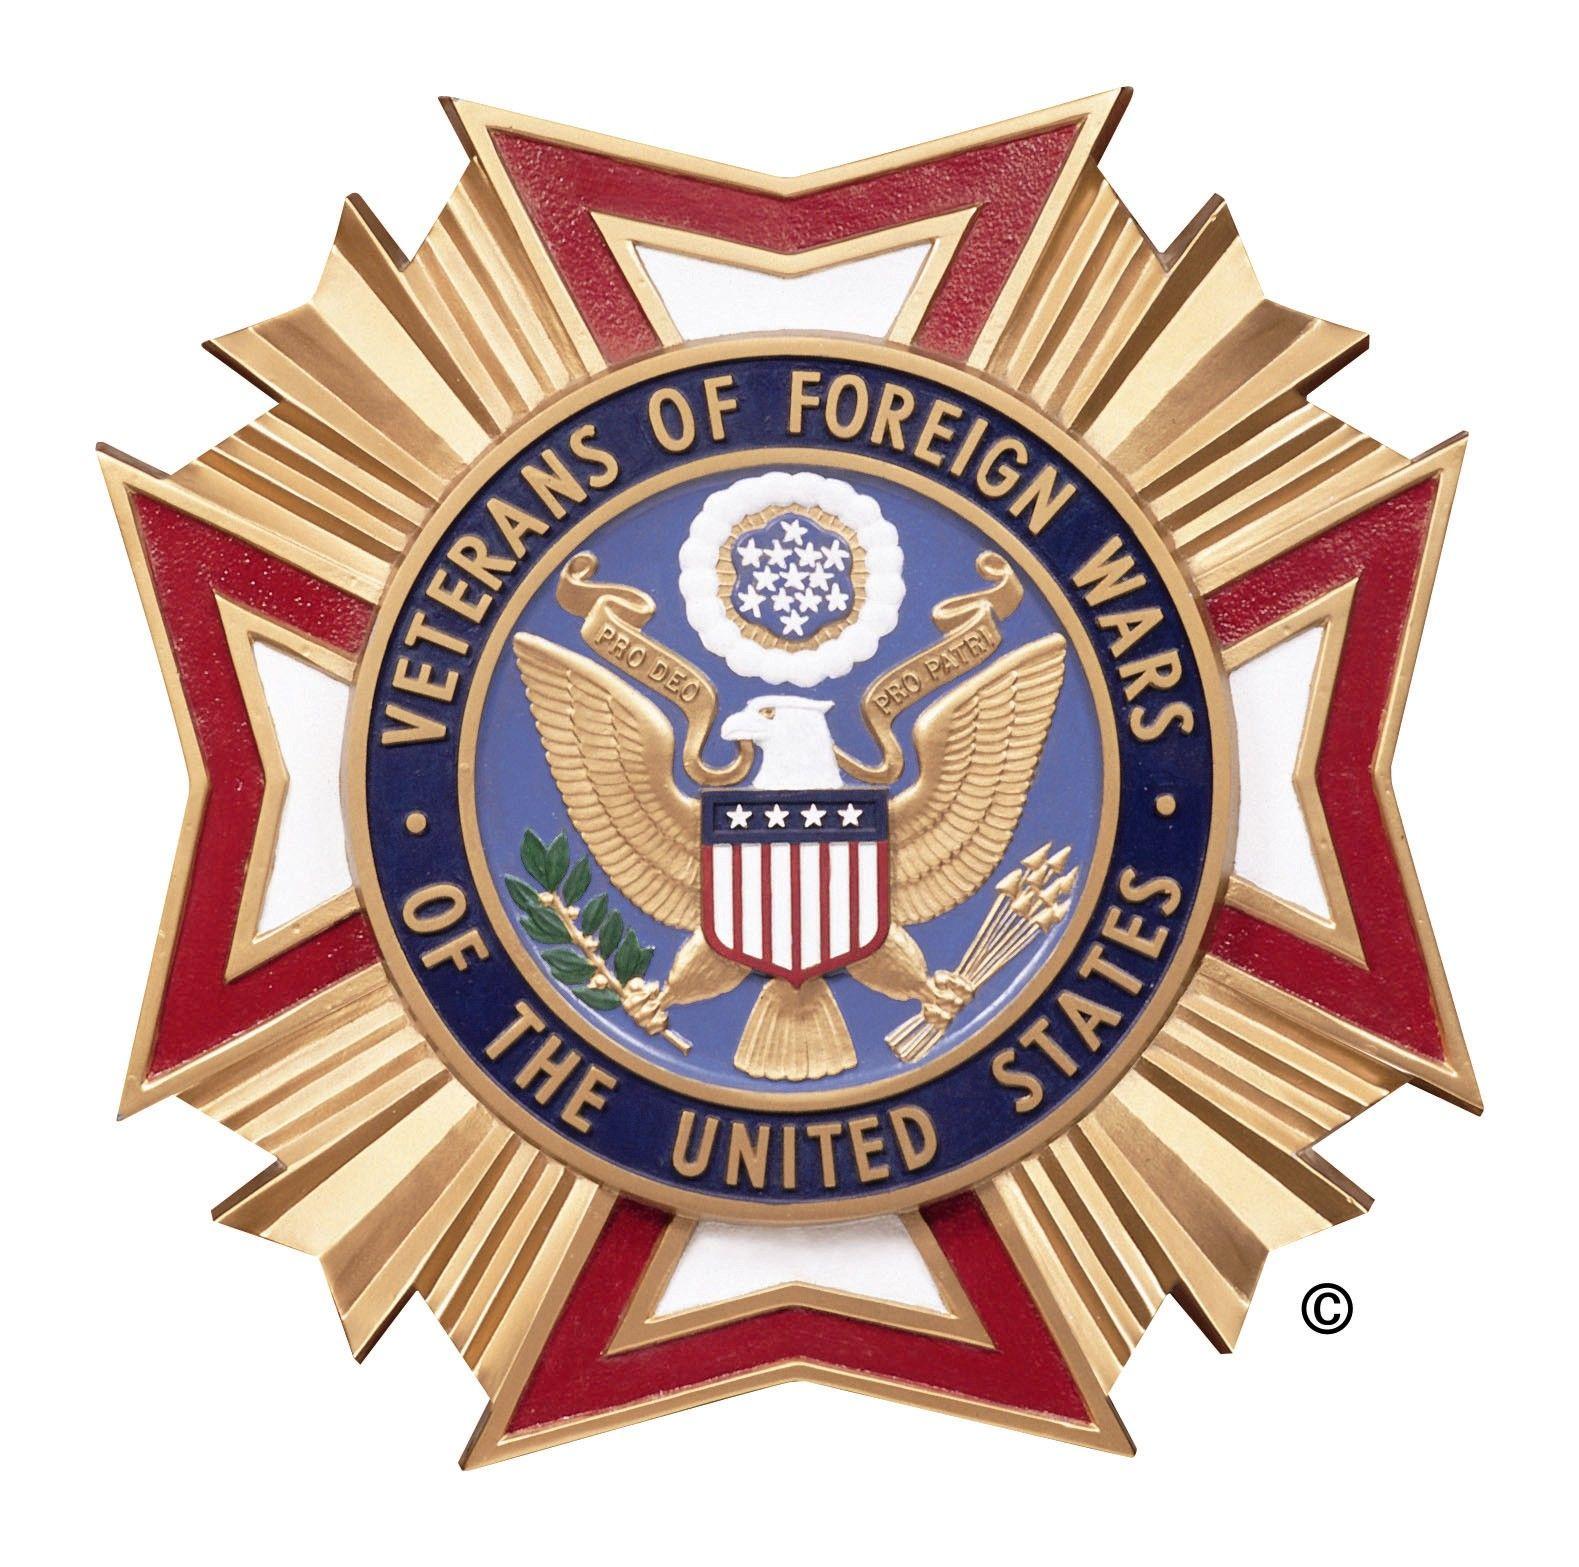 Foreign Military Logo - Veterans of Foreign Wars. Veterans of Foreign Wars of the United